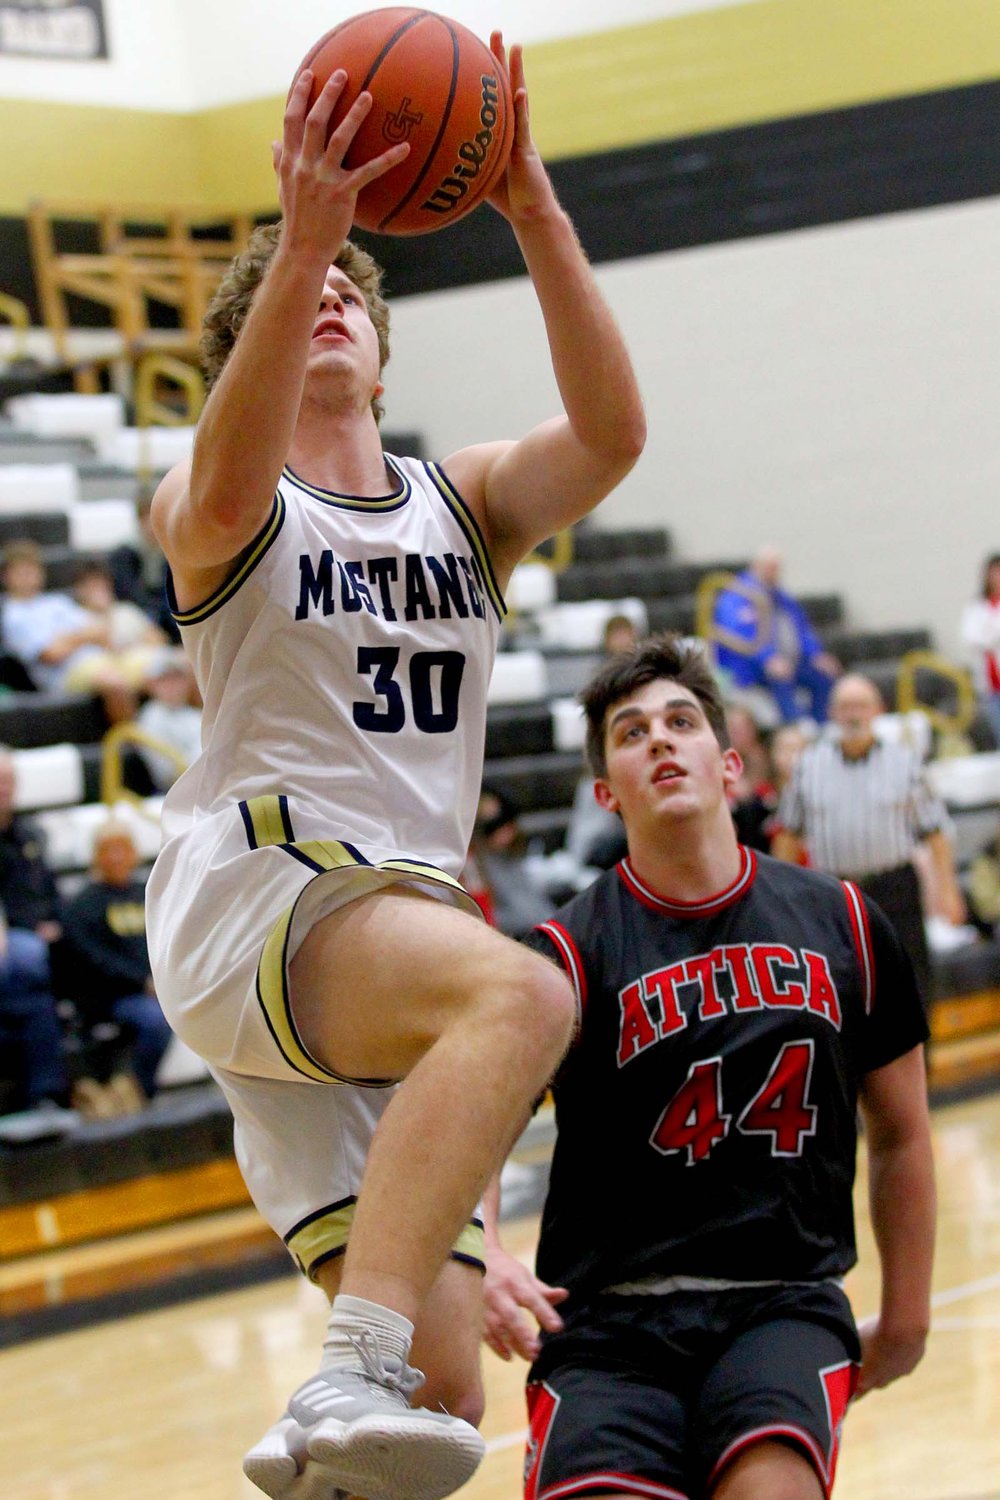 Owen Acton of Fountain Central goes up for a lay-up after getting past Seth Miller of Attica.